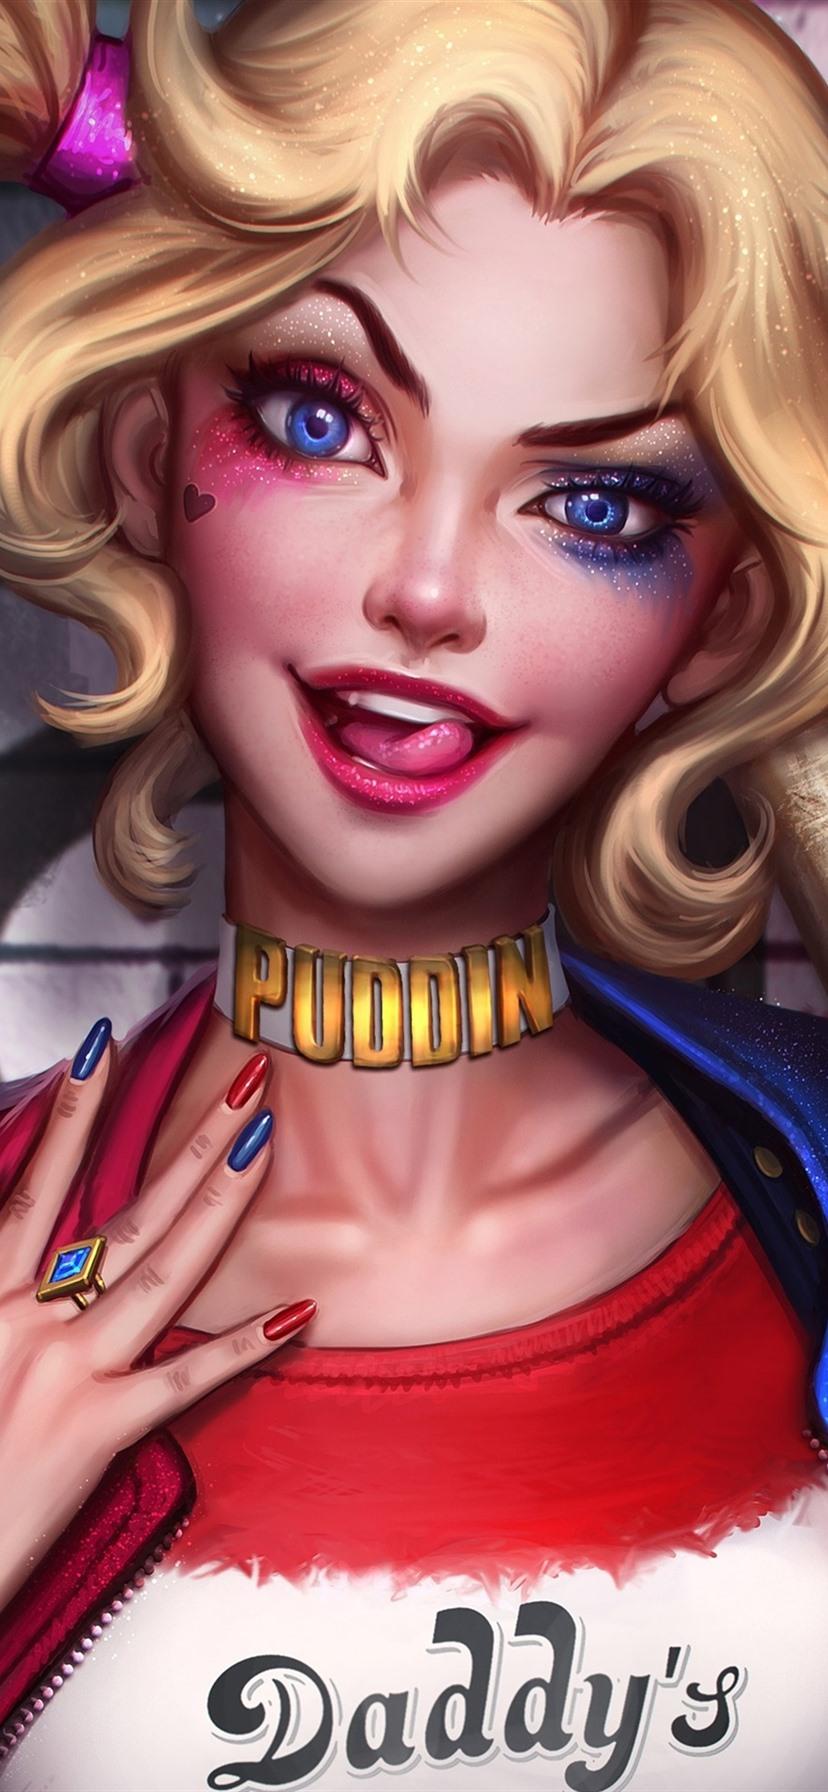 Harley Quinn, DC Comics Heroes, Suicide Squad 1080x1920 IPhone 8 7